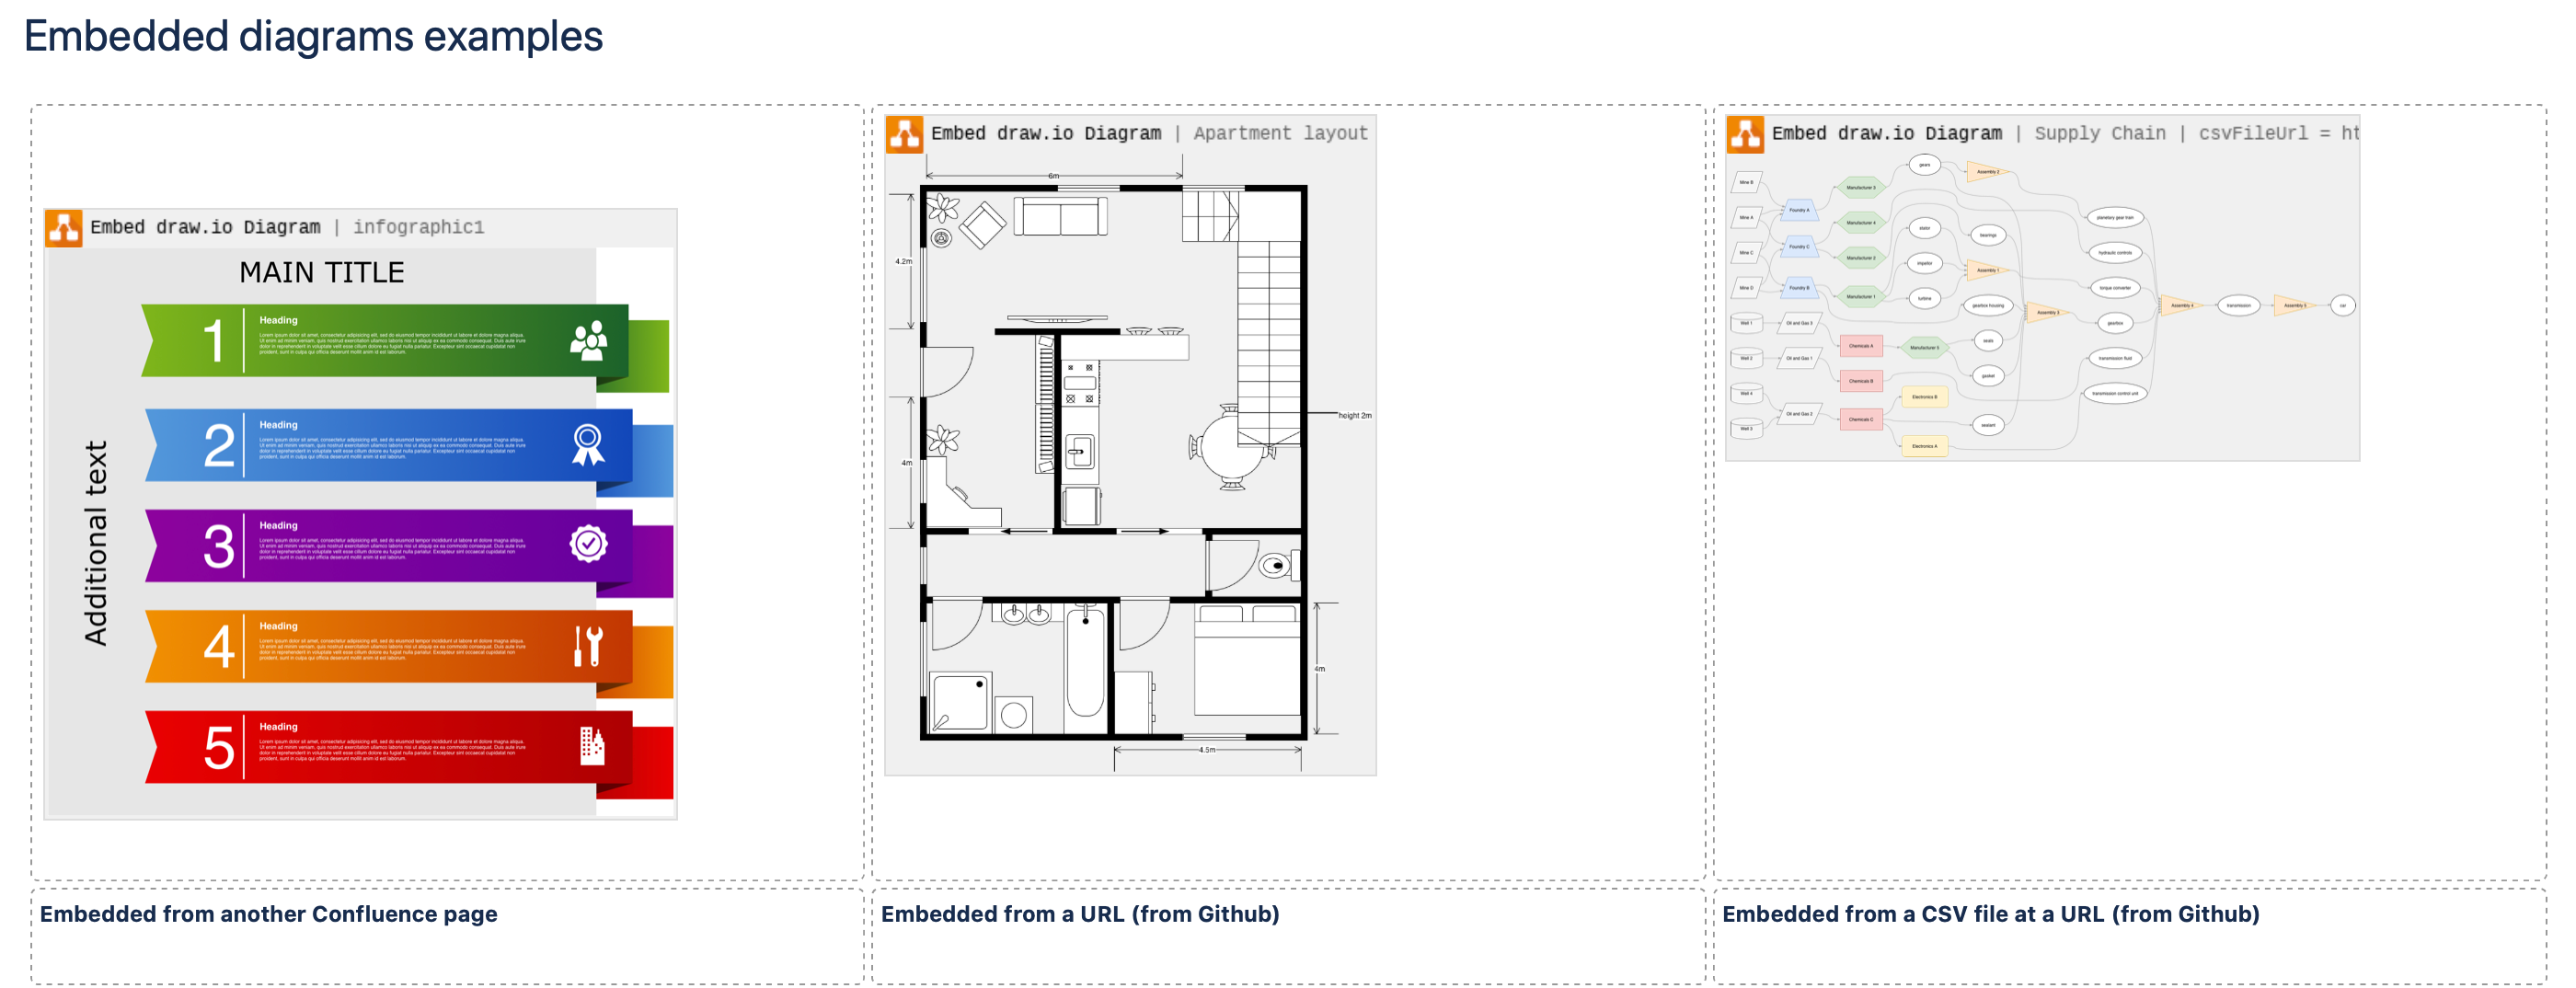 You'll see a preview of the diagrams embedded from another Confluence page or a URL while editing the page